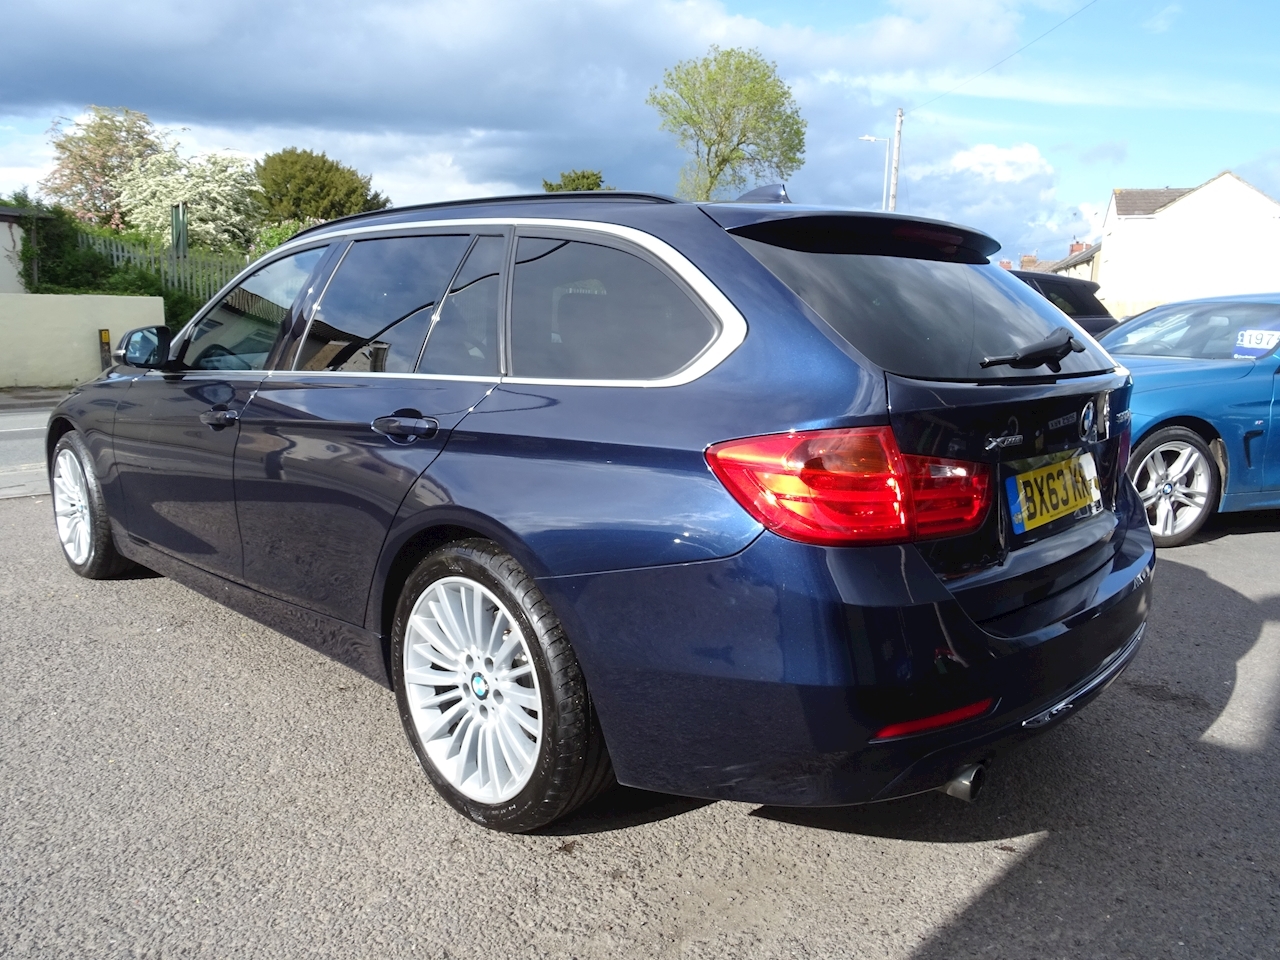 2.0 320d Luxury Touring 5dr Diesel Automatic xDrive (s/s) (133 g/km, 184 bhp)